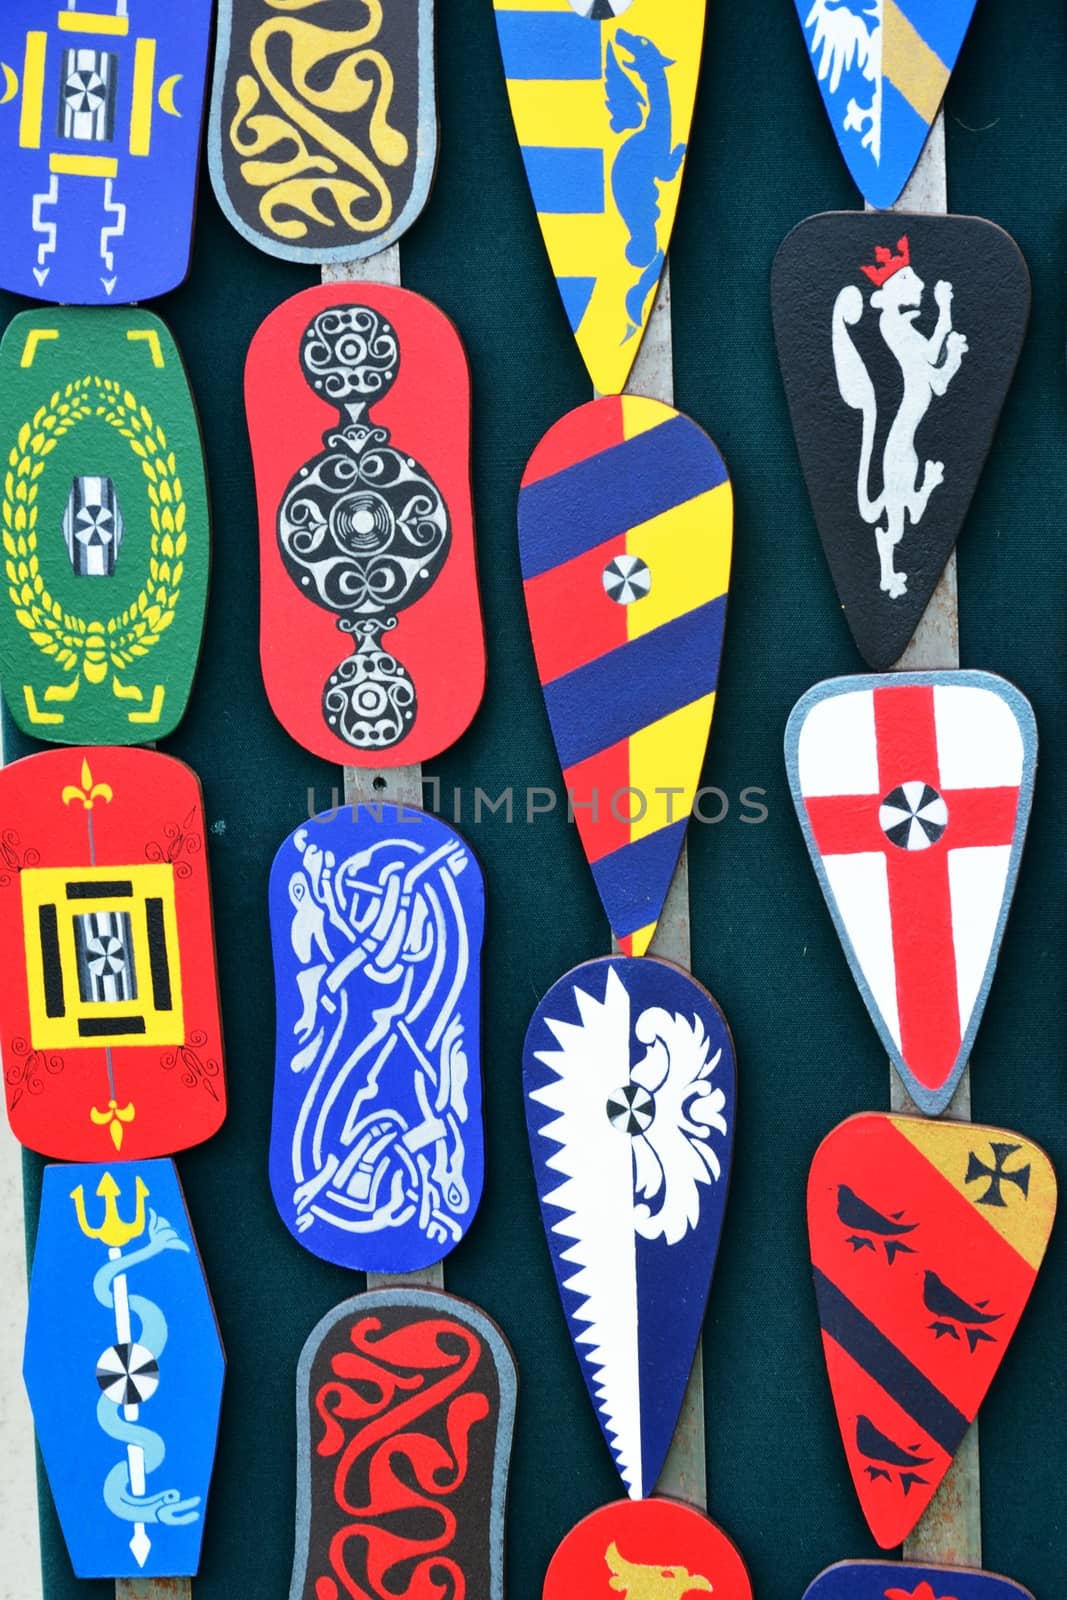 shield badges by pauws99